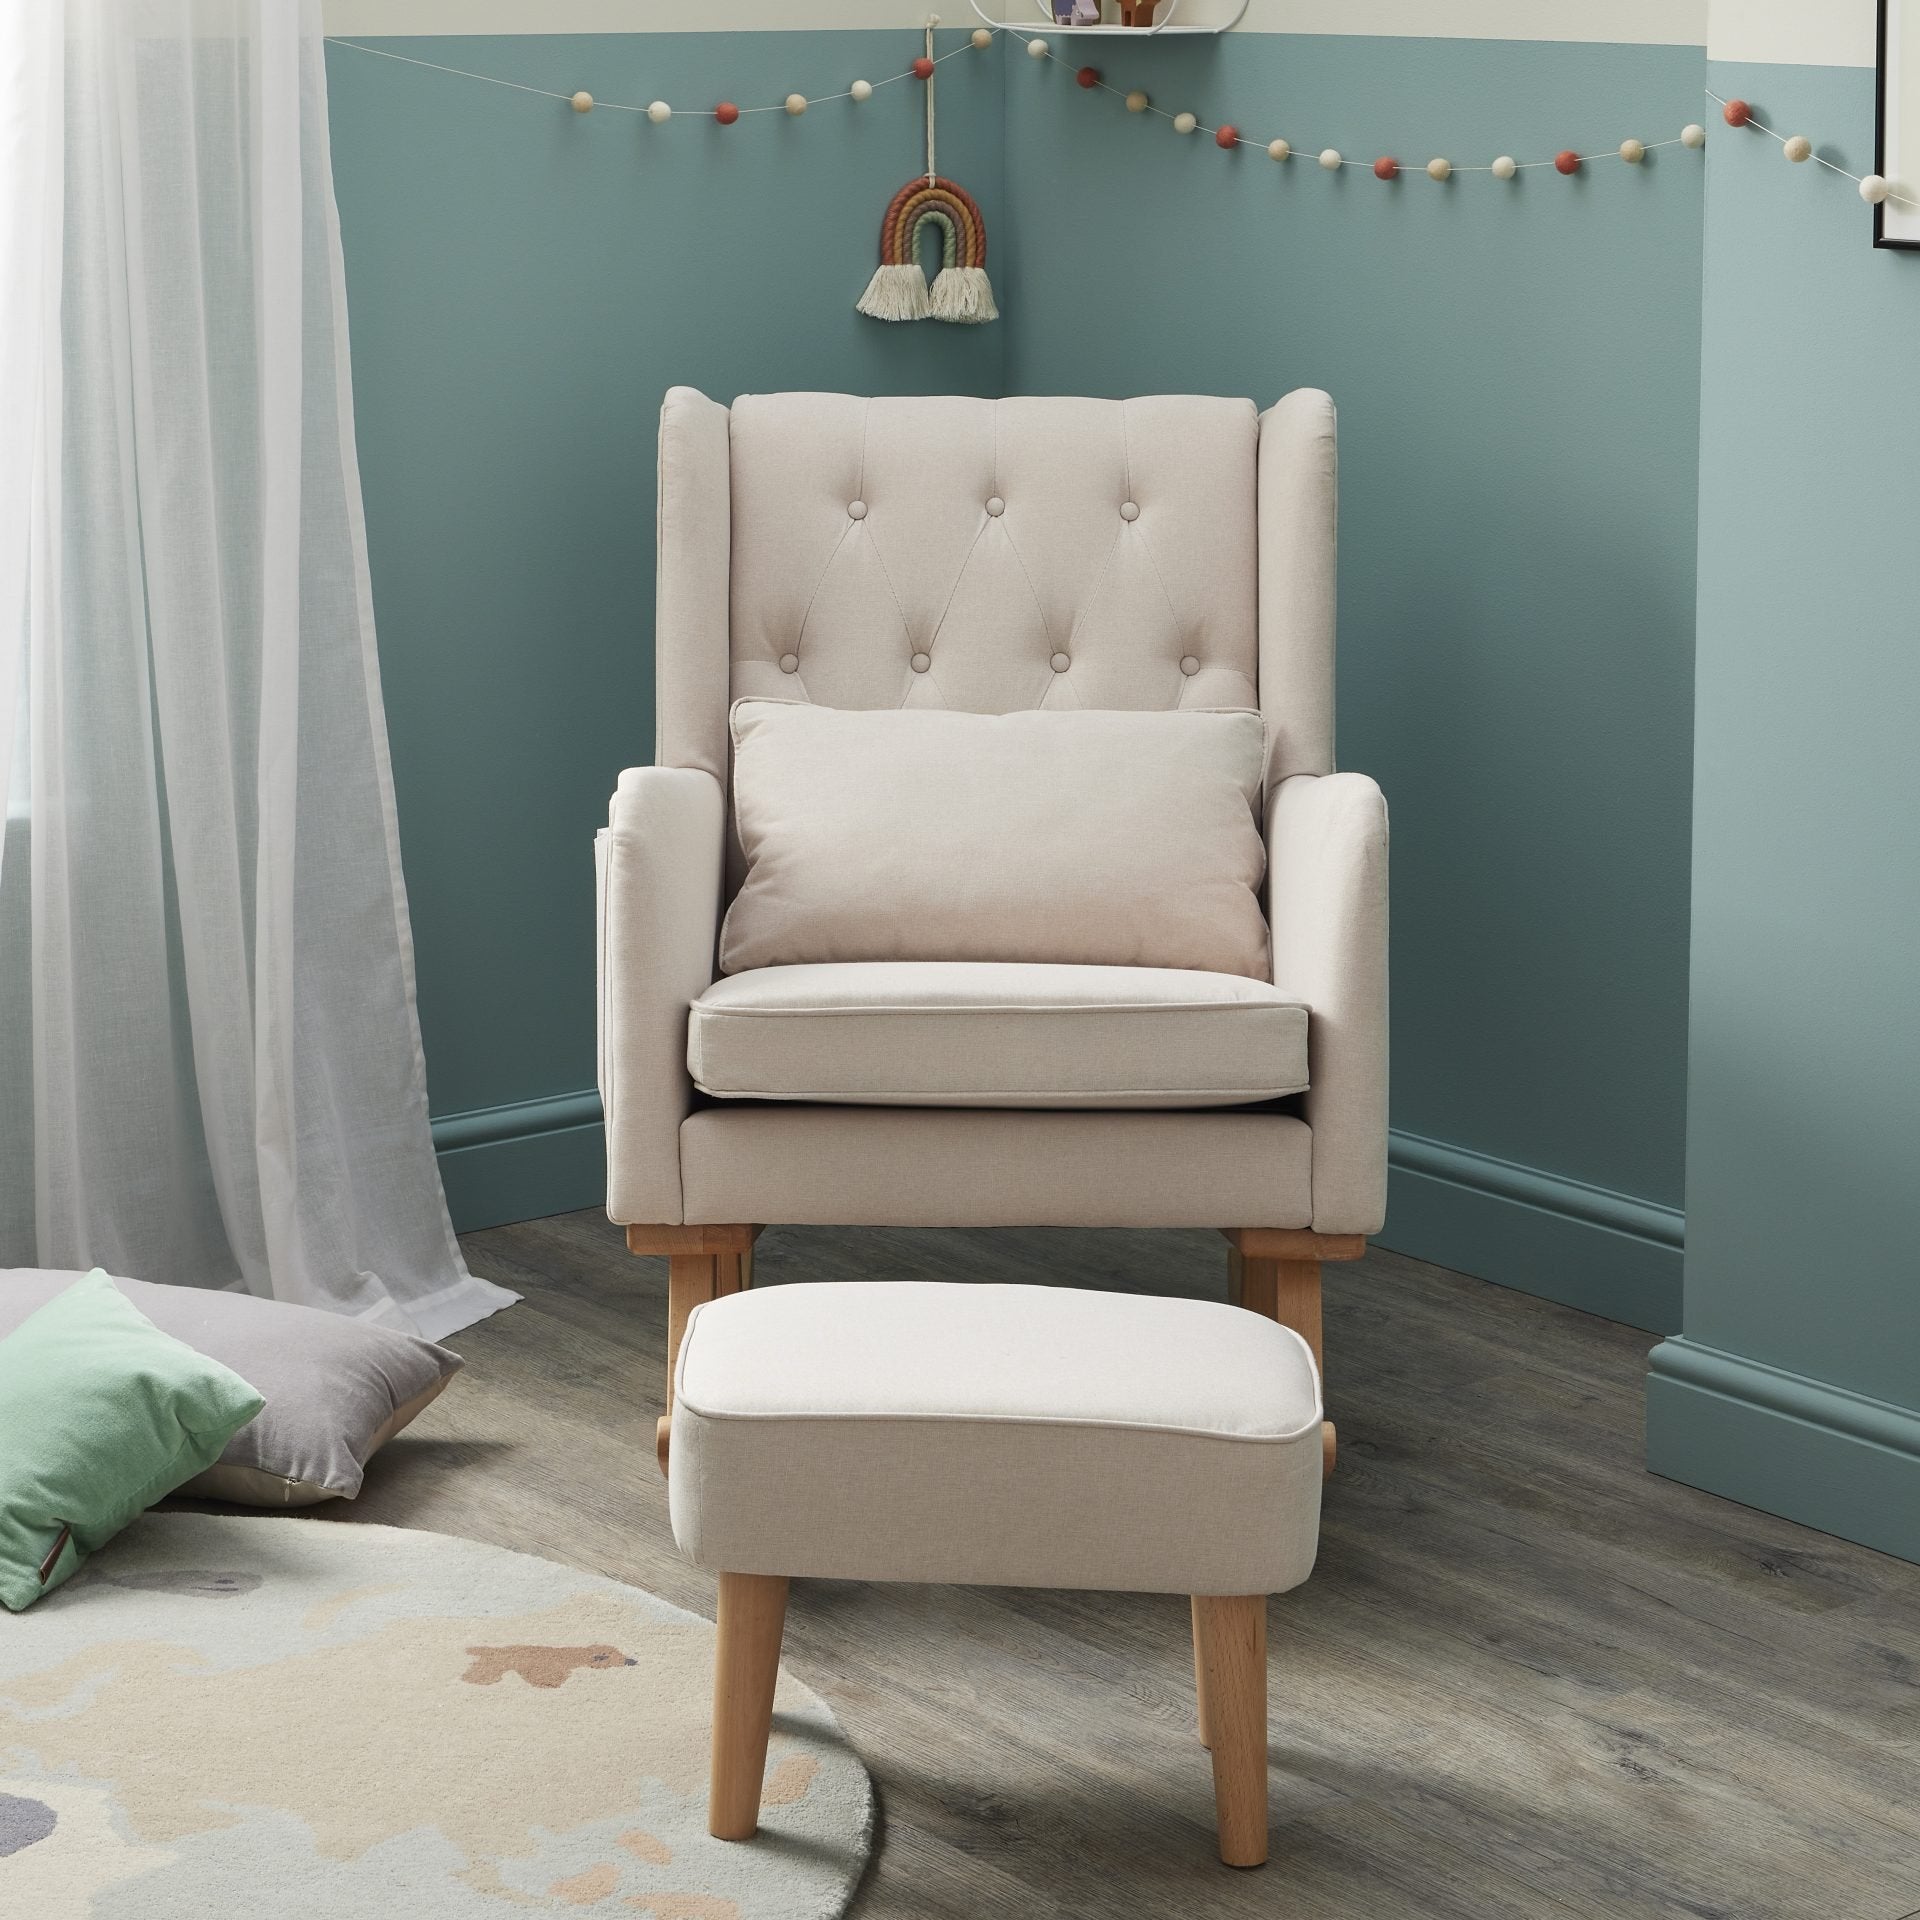 View Babymore Lux Nursing Chair with Footstool Cream information